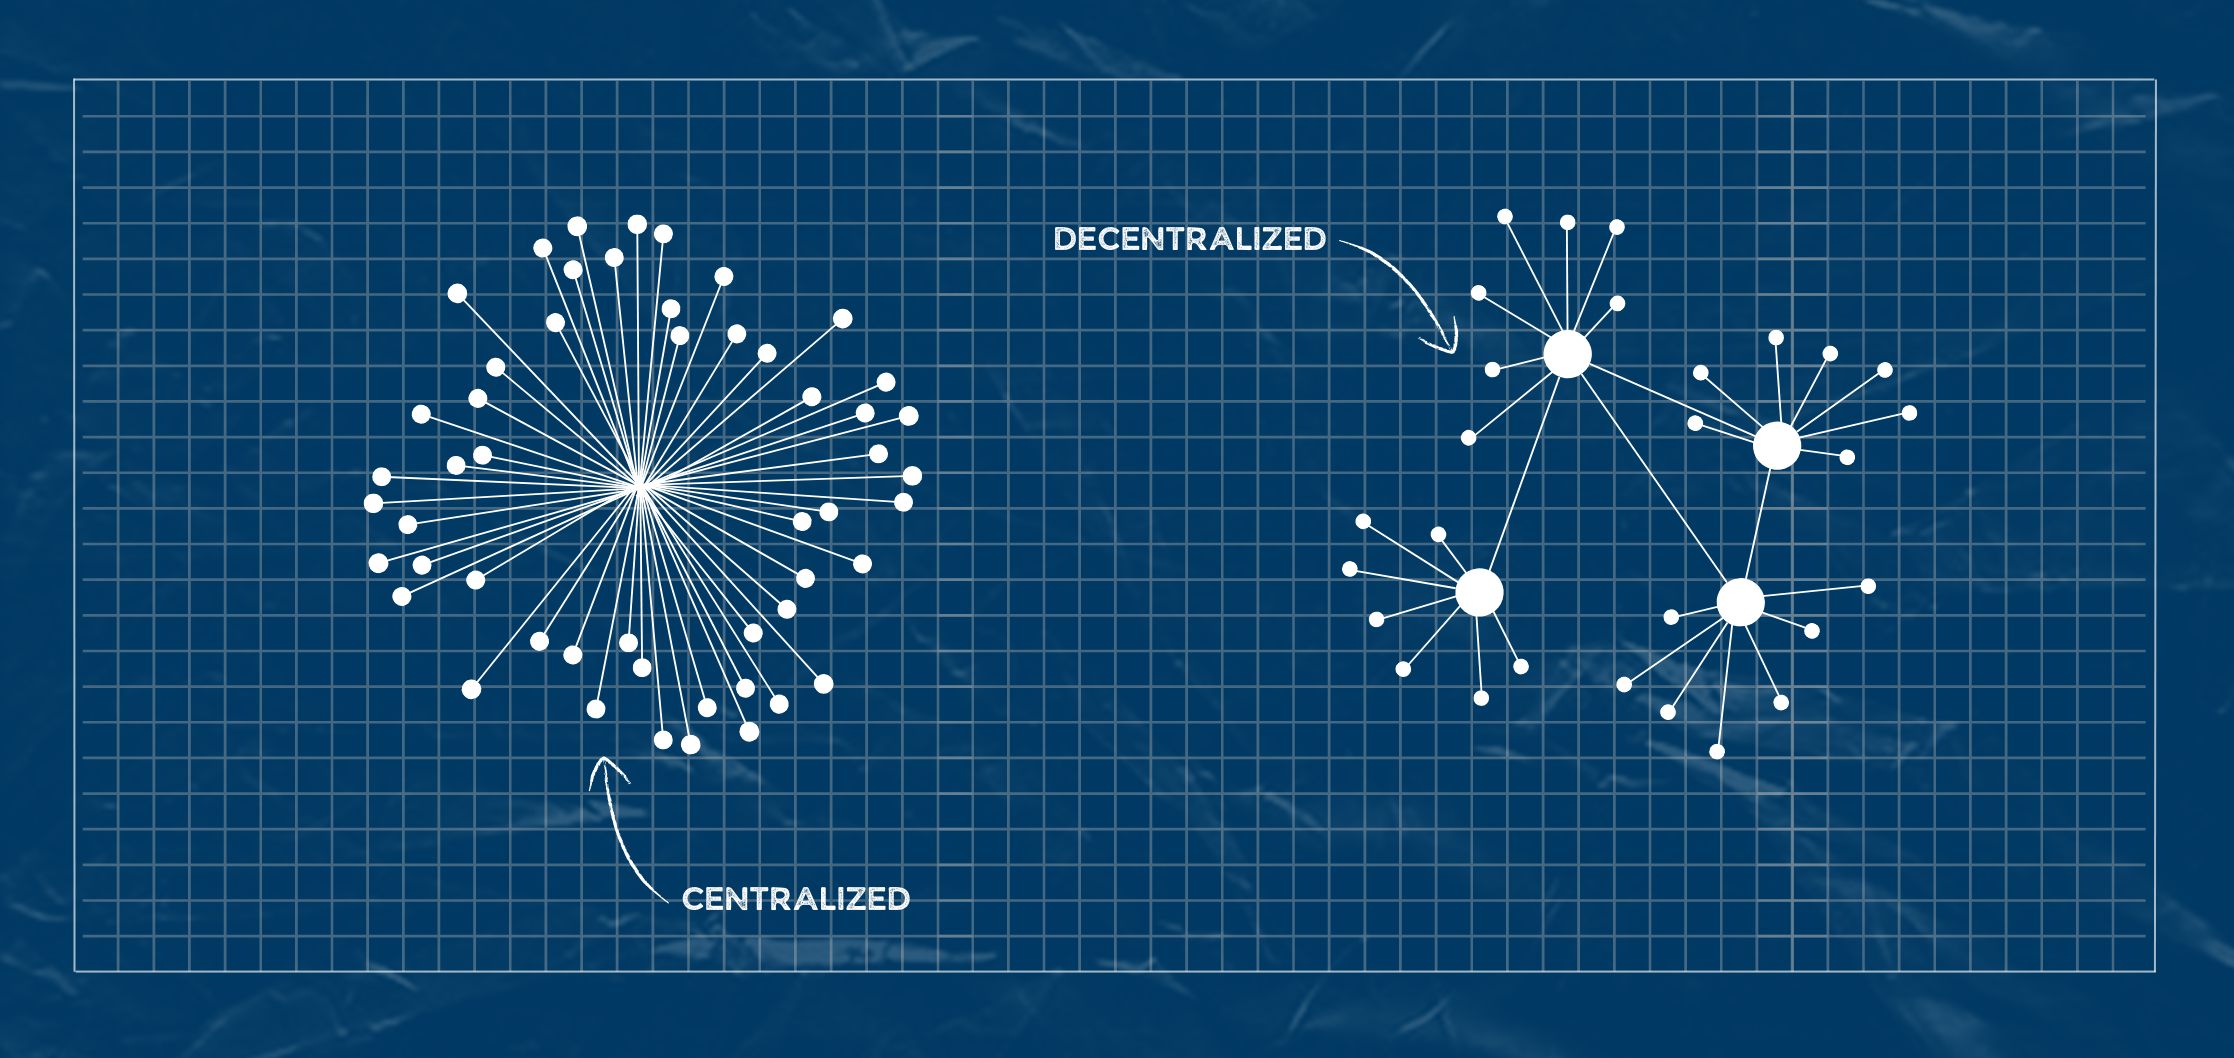 Examples of centralized and decentralized